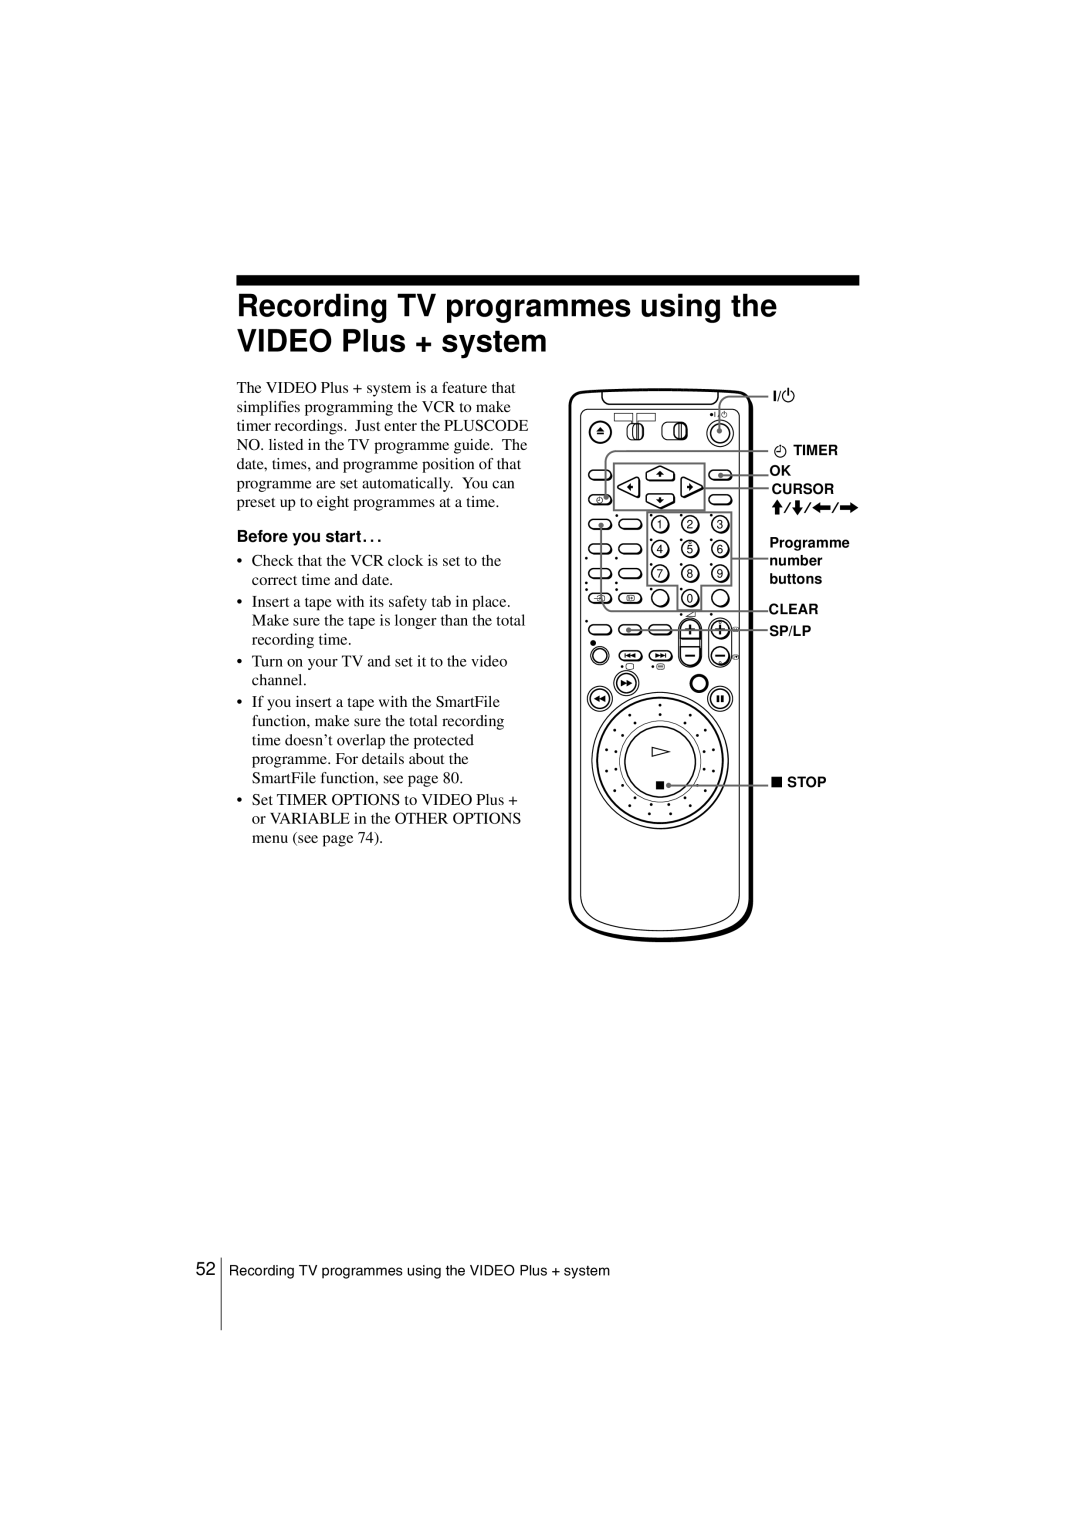 Sony SLV-SF990G manual Recording TV programmes using the VIDEO Plus + system, Before you start…, Timer Ok Cursor 